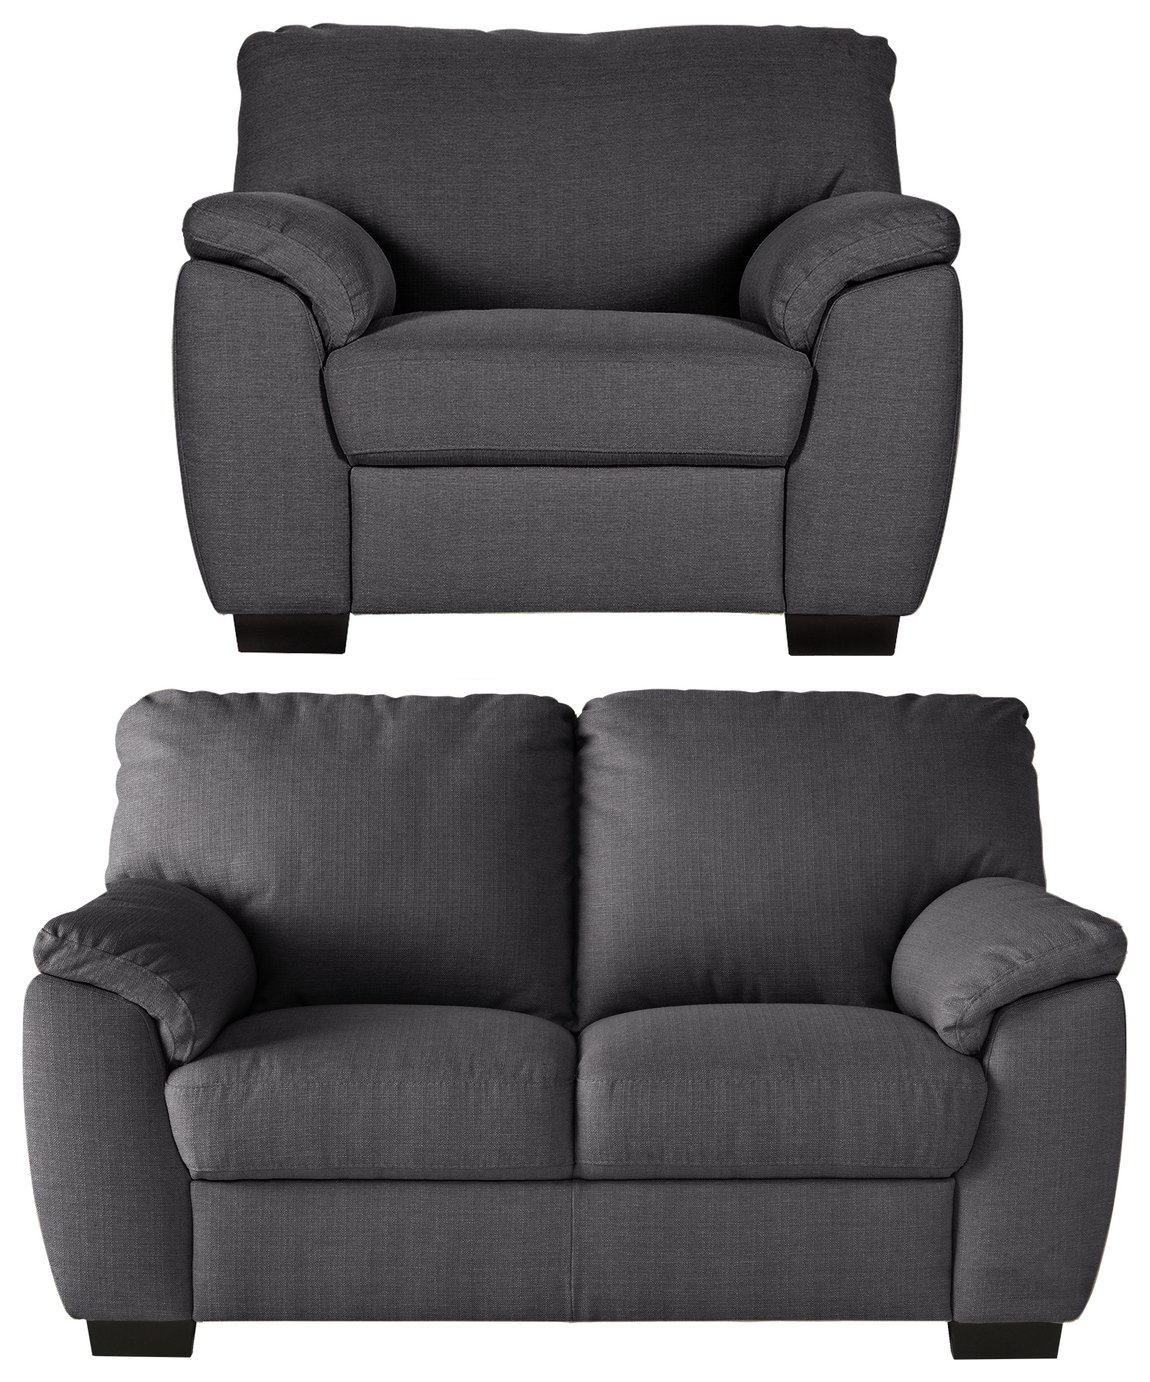 Buy Heart of House Sherbourne Striped Fabric Chair - Charcoal at Argos